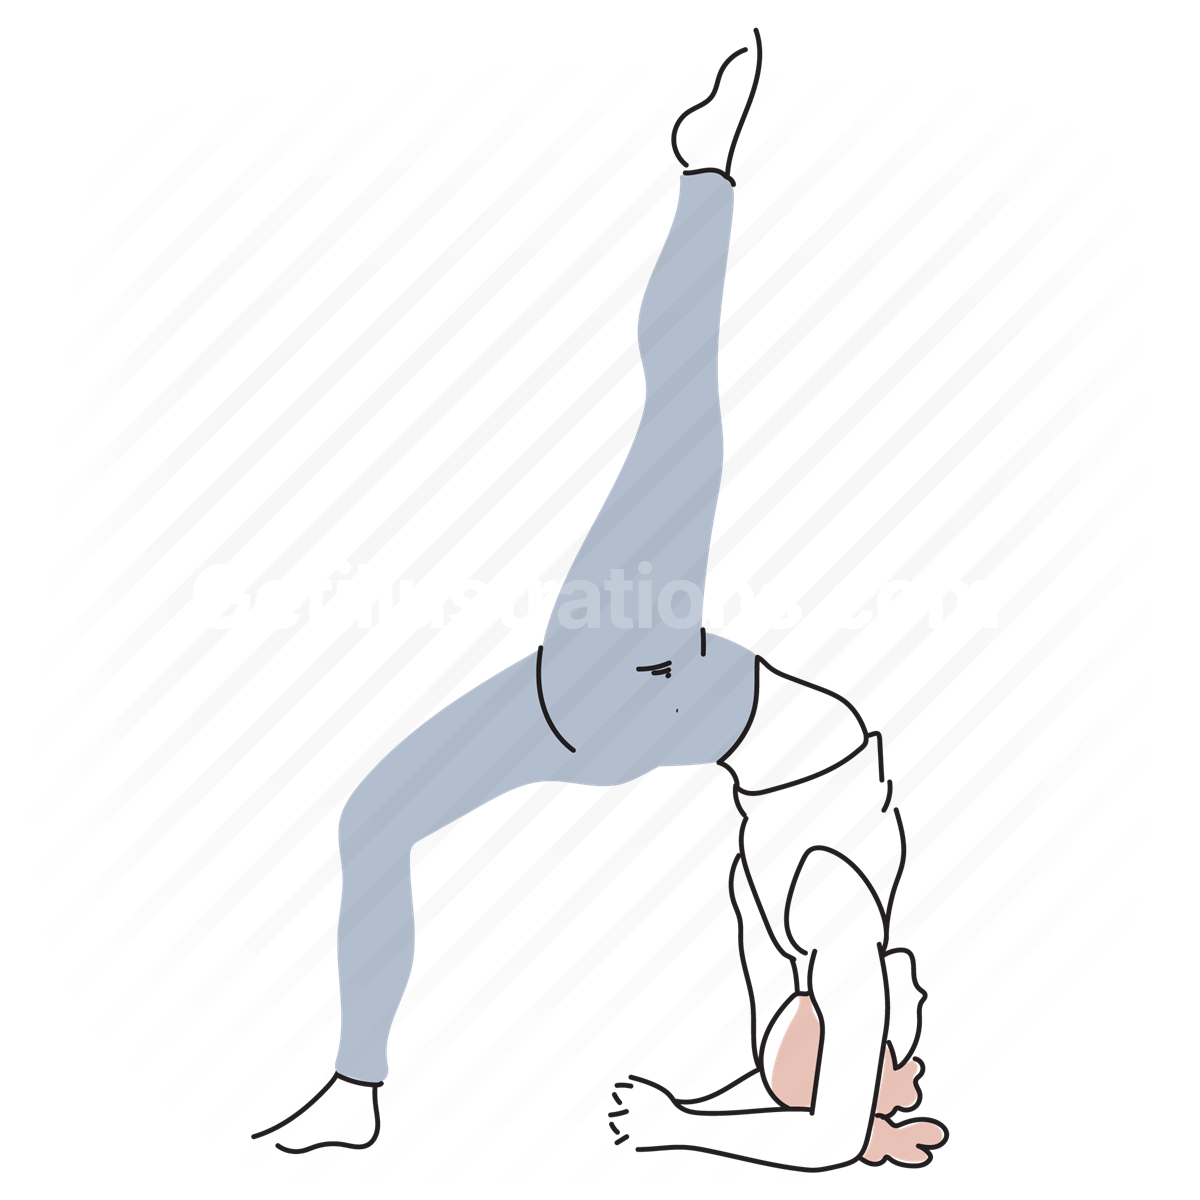 Semi-static yoga poses used for reconstructing joint angles in dynamic... |  Download Scientific Diagram